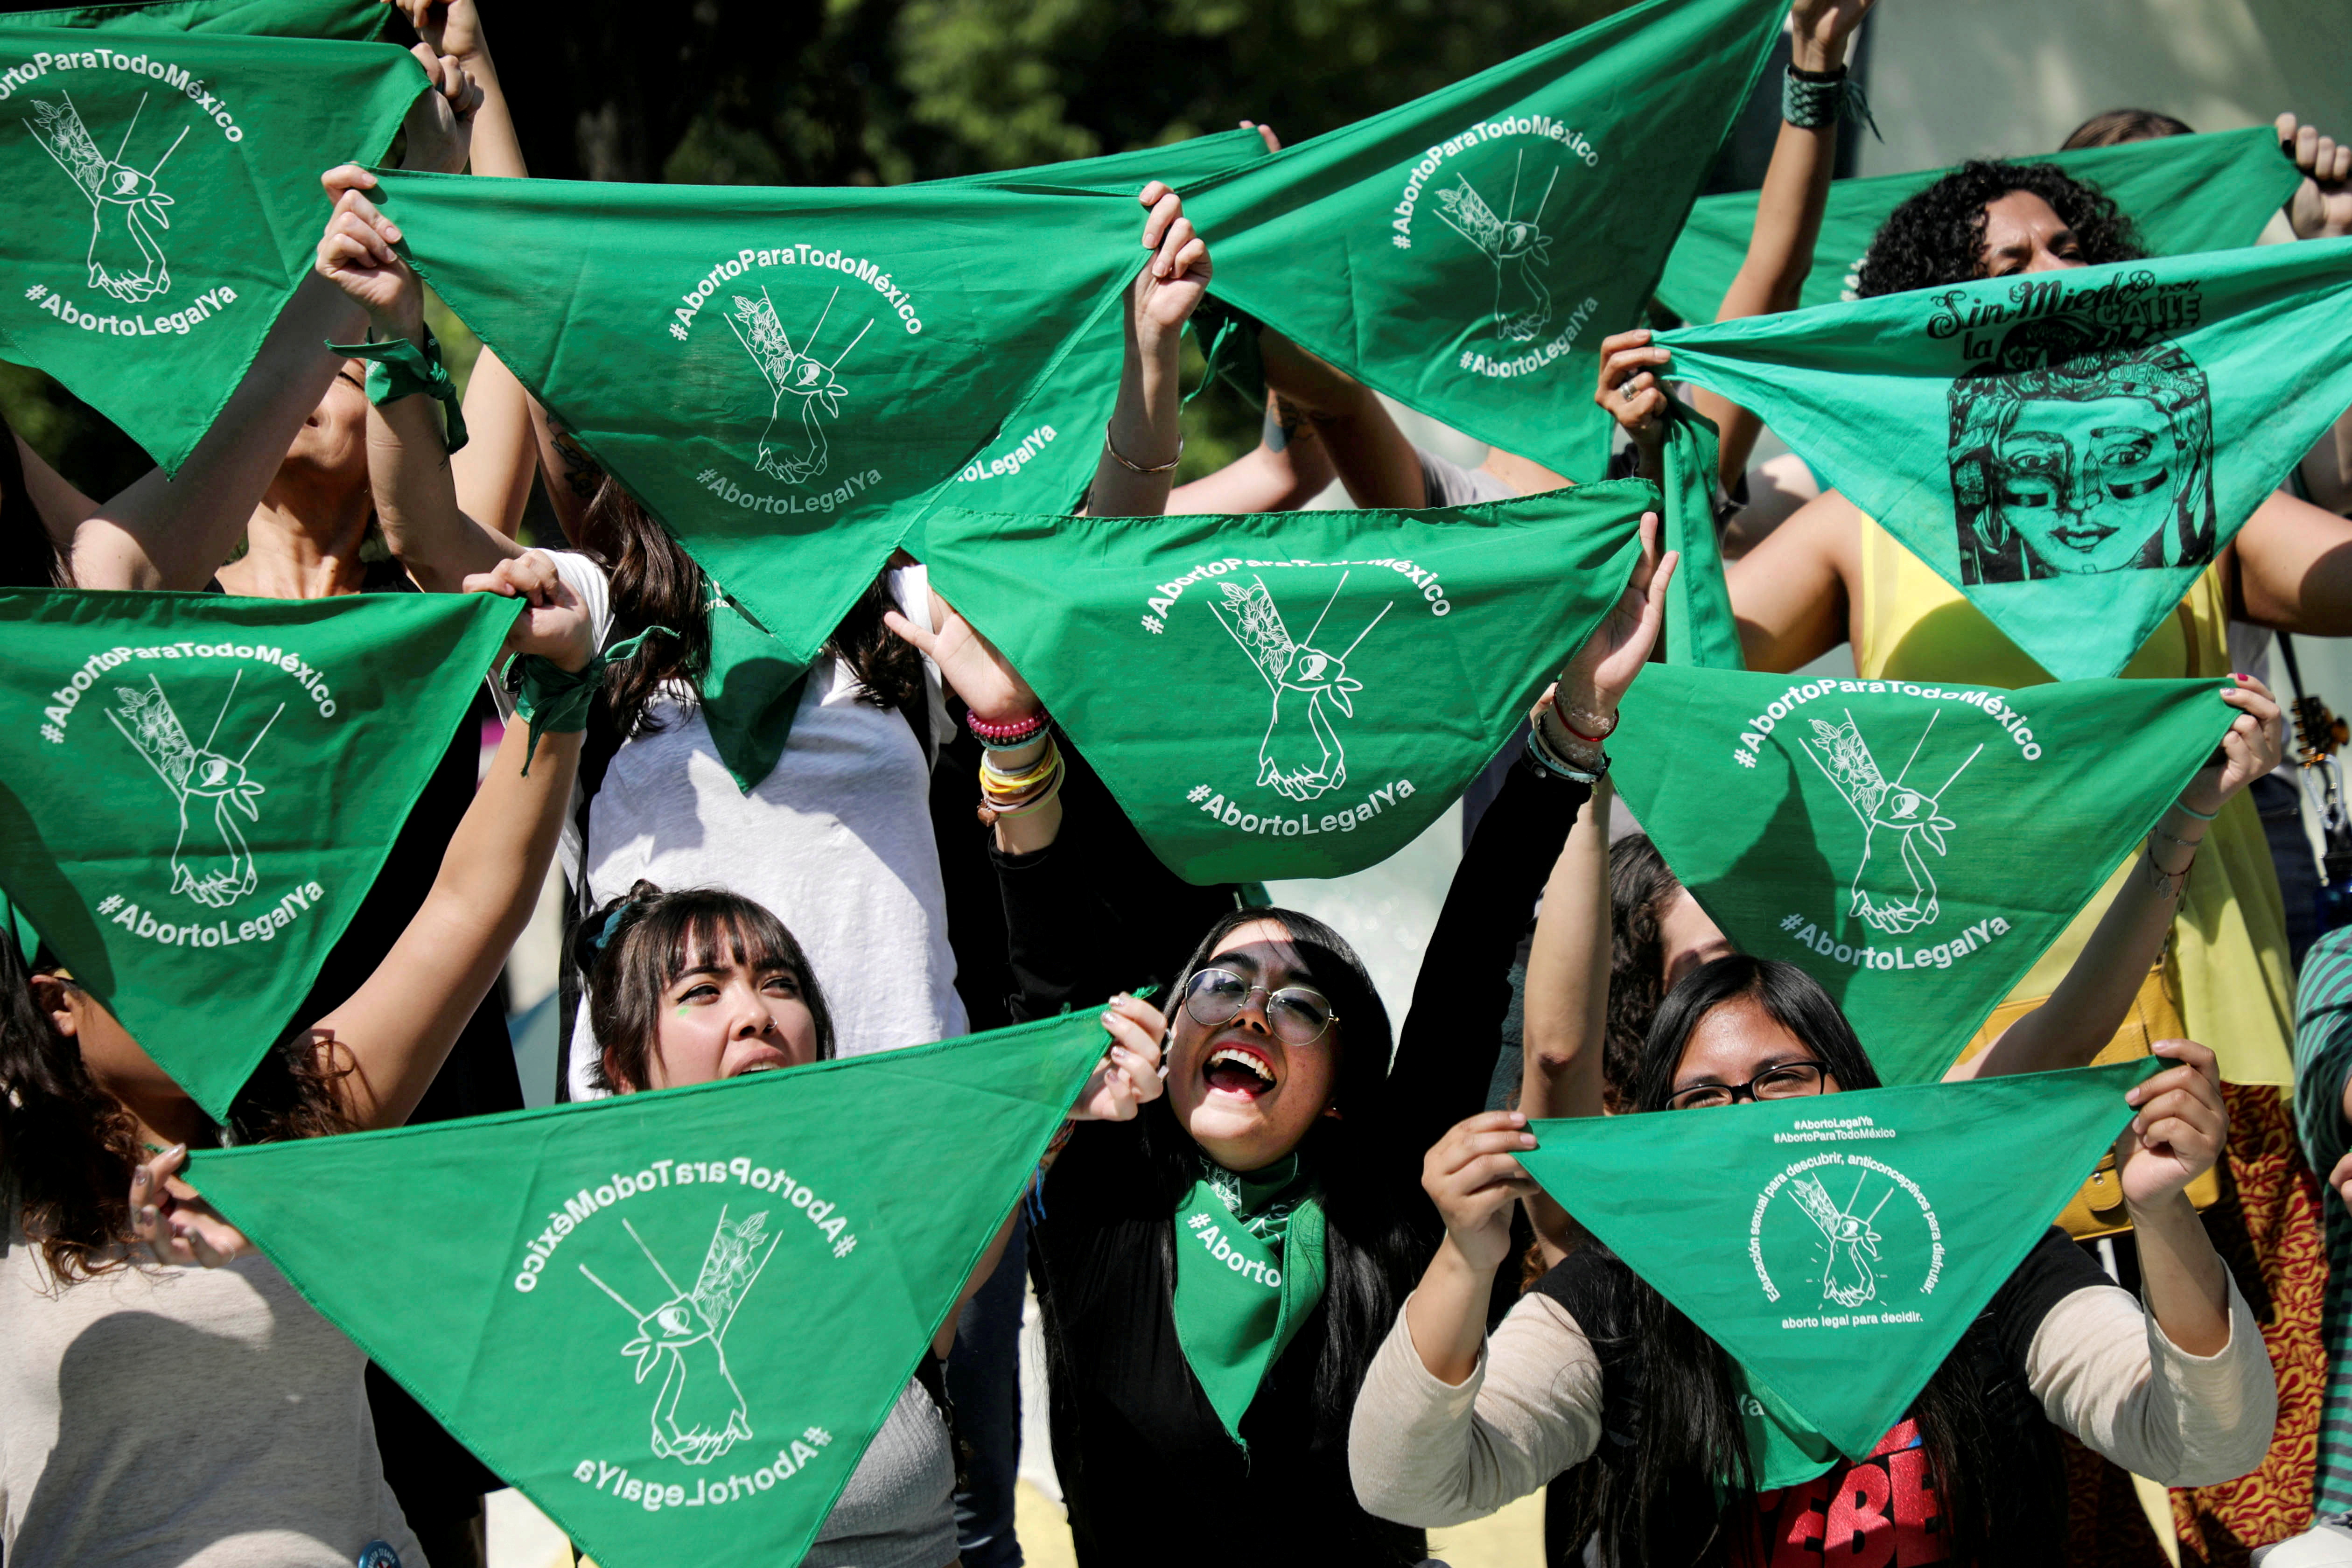 Women hold green handkerchiefs during a protest in support of legal and safe abortion in Mexico City